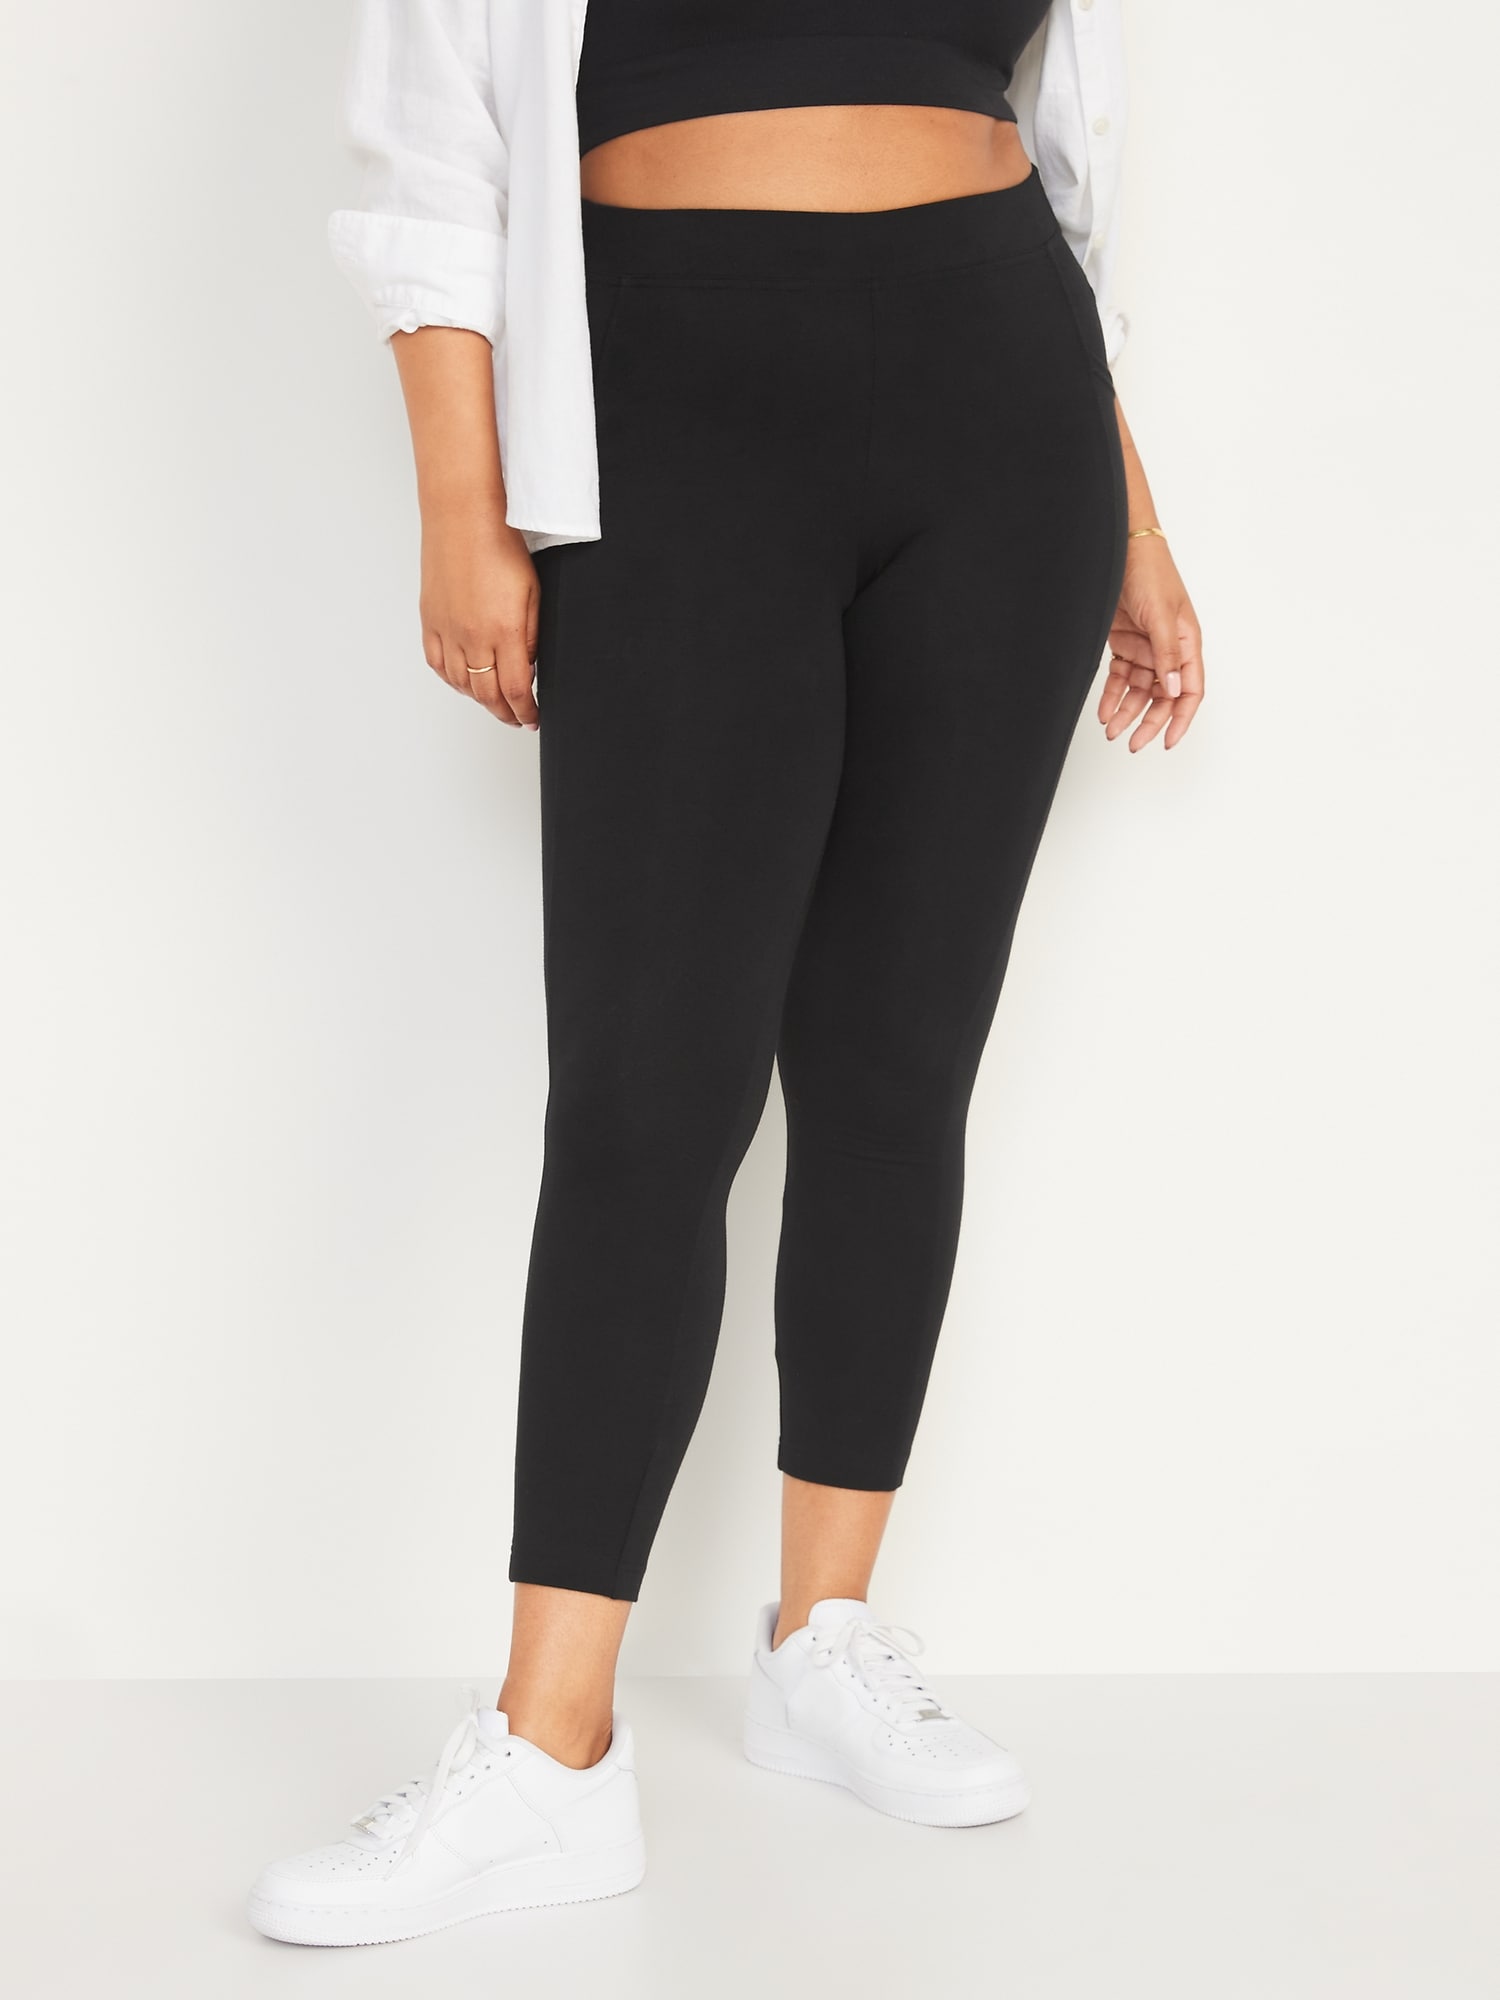 the most perfect leggings for petite girls with a 23” inseam and POCKE